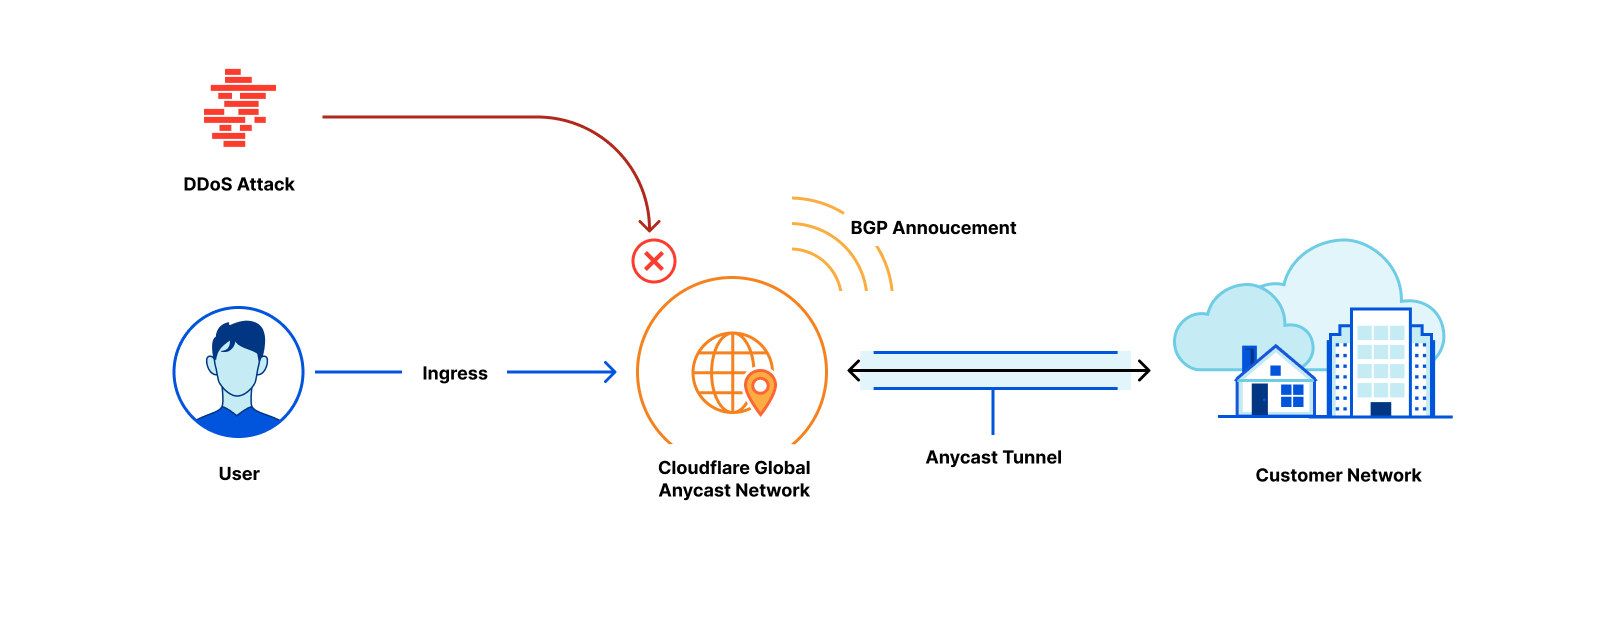 Magic Transit architecture: Internet BGP advertisement attracts traffic to Cloudflare’s network, where attack mitigation and security policies are applied before clean traffic is forwarded back to customer networks with an Anycast GRE tunnel or Cloudflare Network Interconnect.